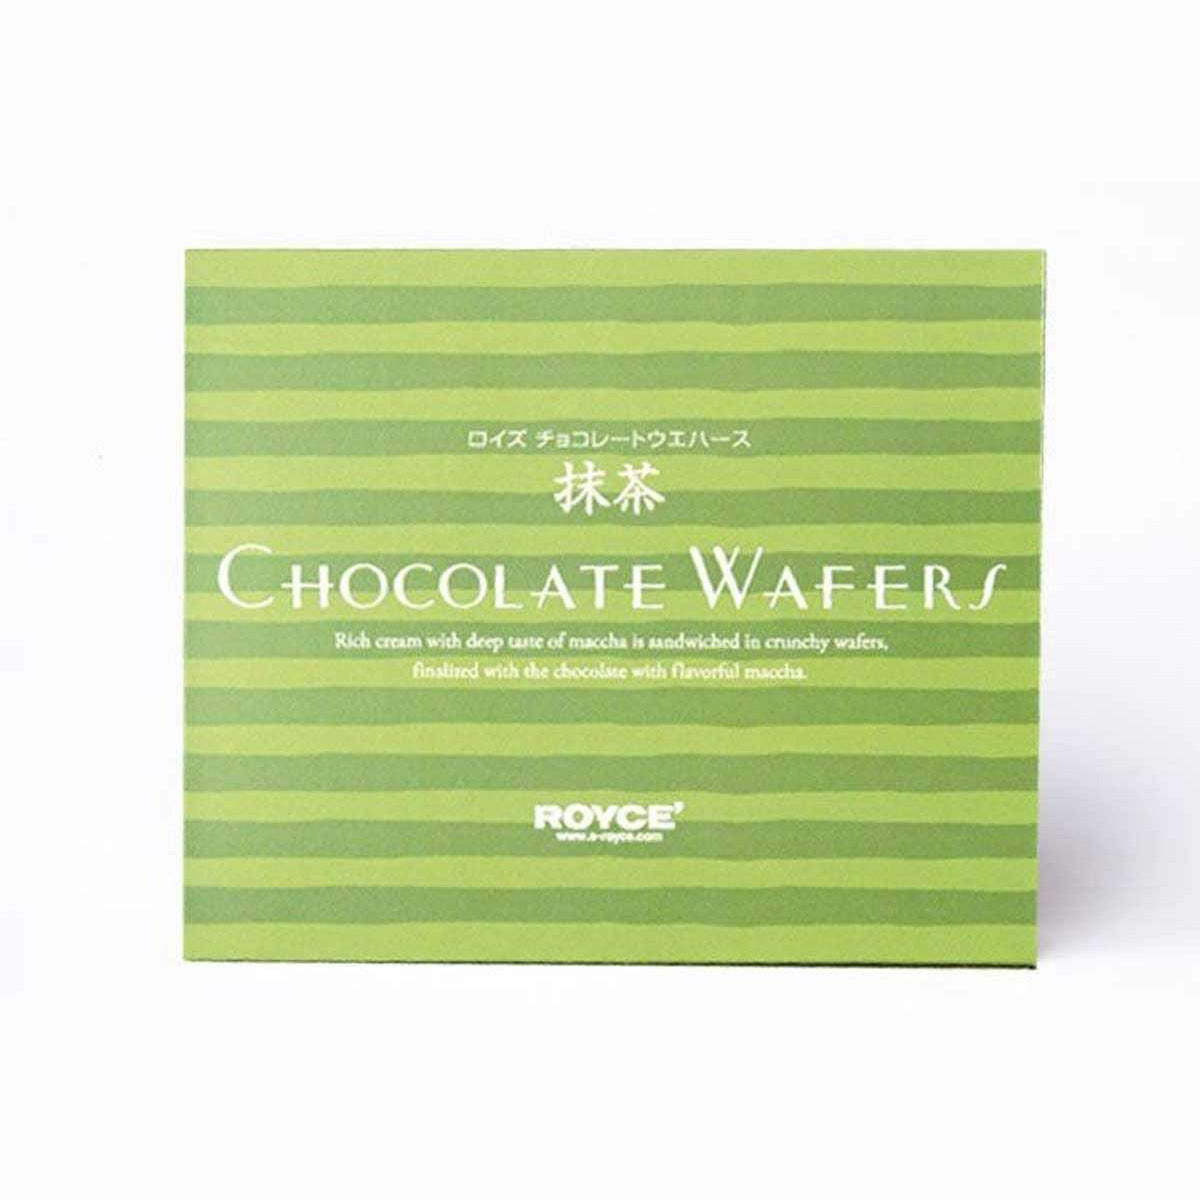 ROYCE' Chocolate - Chocolate Wafers "Matcha" - Image shows a green striped box. White text says Chocolate Wafers Rich cream with deep taste of matcha is sandwiched in crunchy wafers, finalized with the chocolate with flavorful matcha. ROYCE'. 